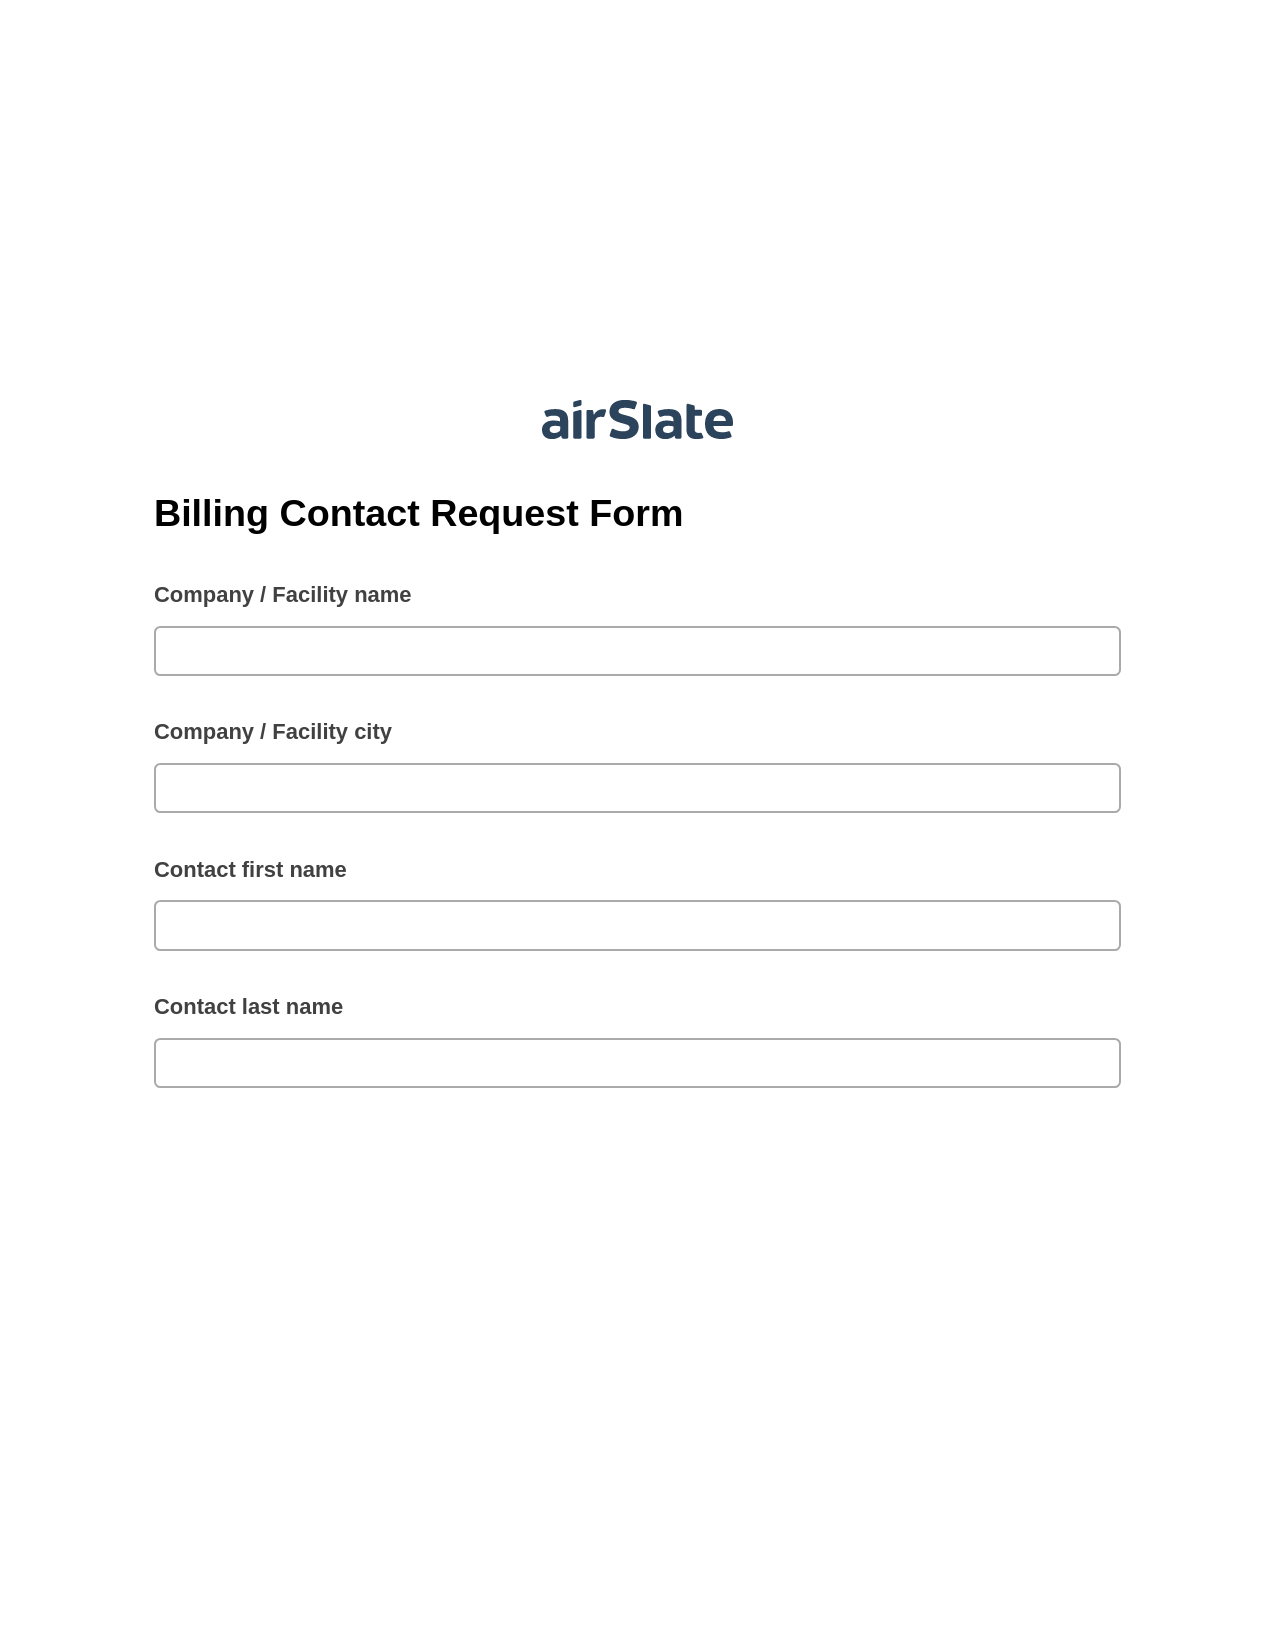 Billing Contact Request Form Pre-fill Document Bot, Create Slate every Google Sheet Update Bot, Slack Notification Postfinish Bot